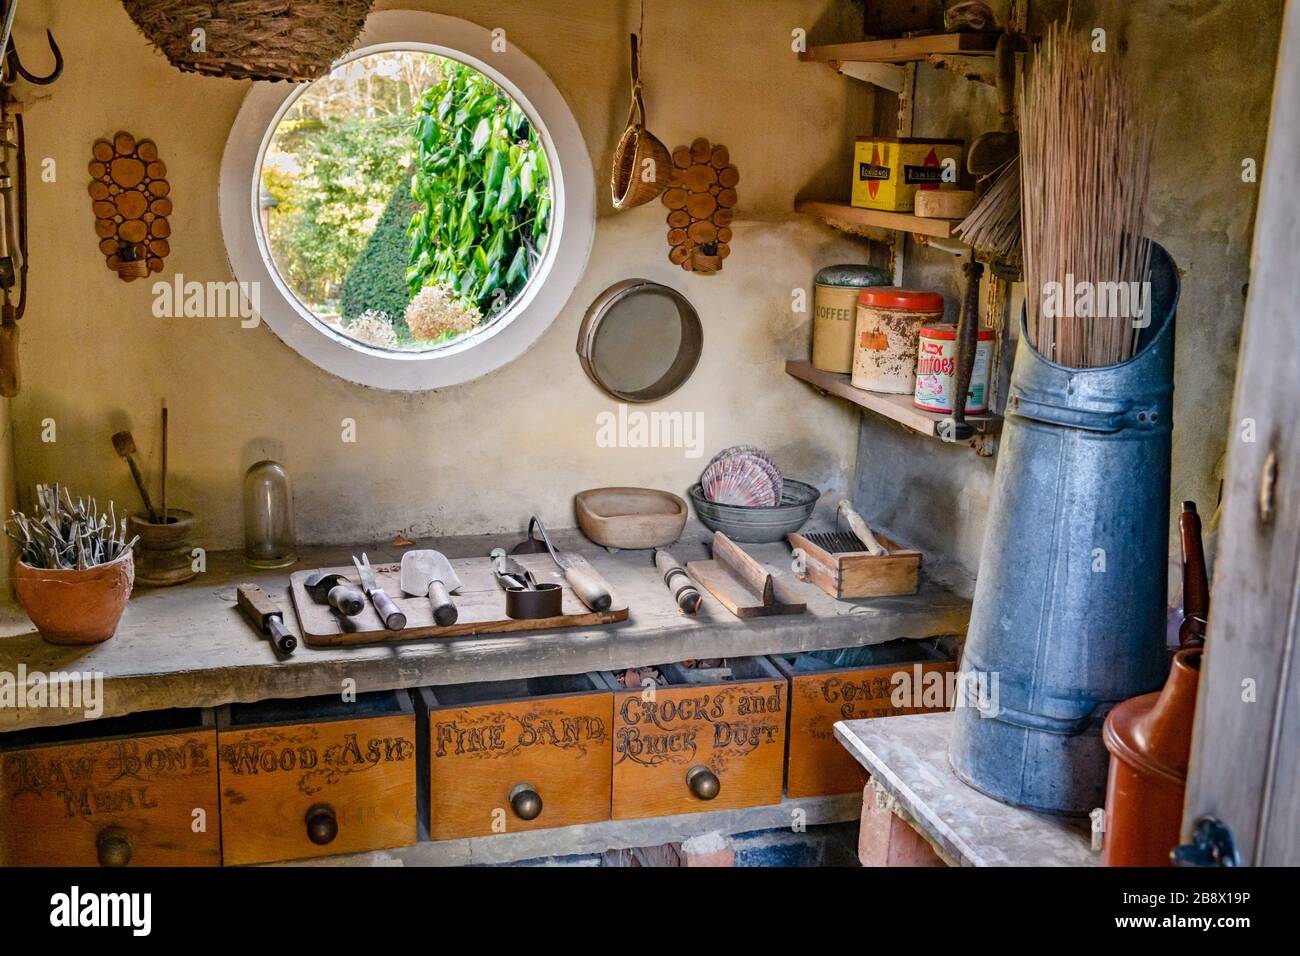 Old rustic potting shed interior, garden view through round window, gardening tools, workbench, retro containers & boxes - York Gate Garden,  Leeds UK Stock Photo